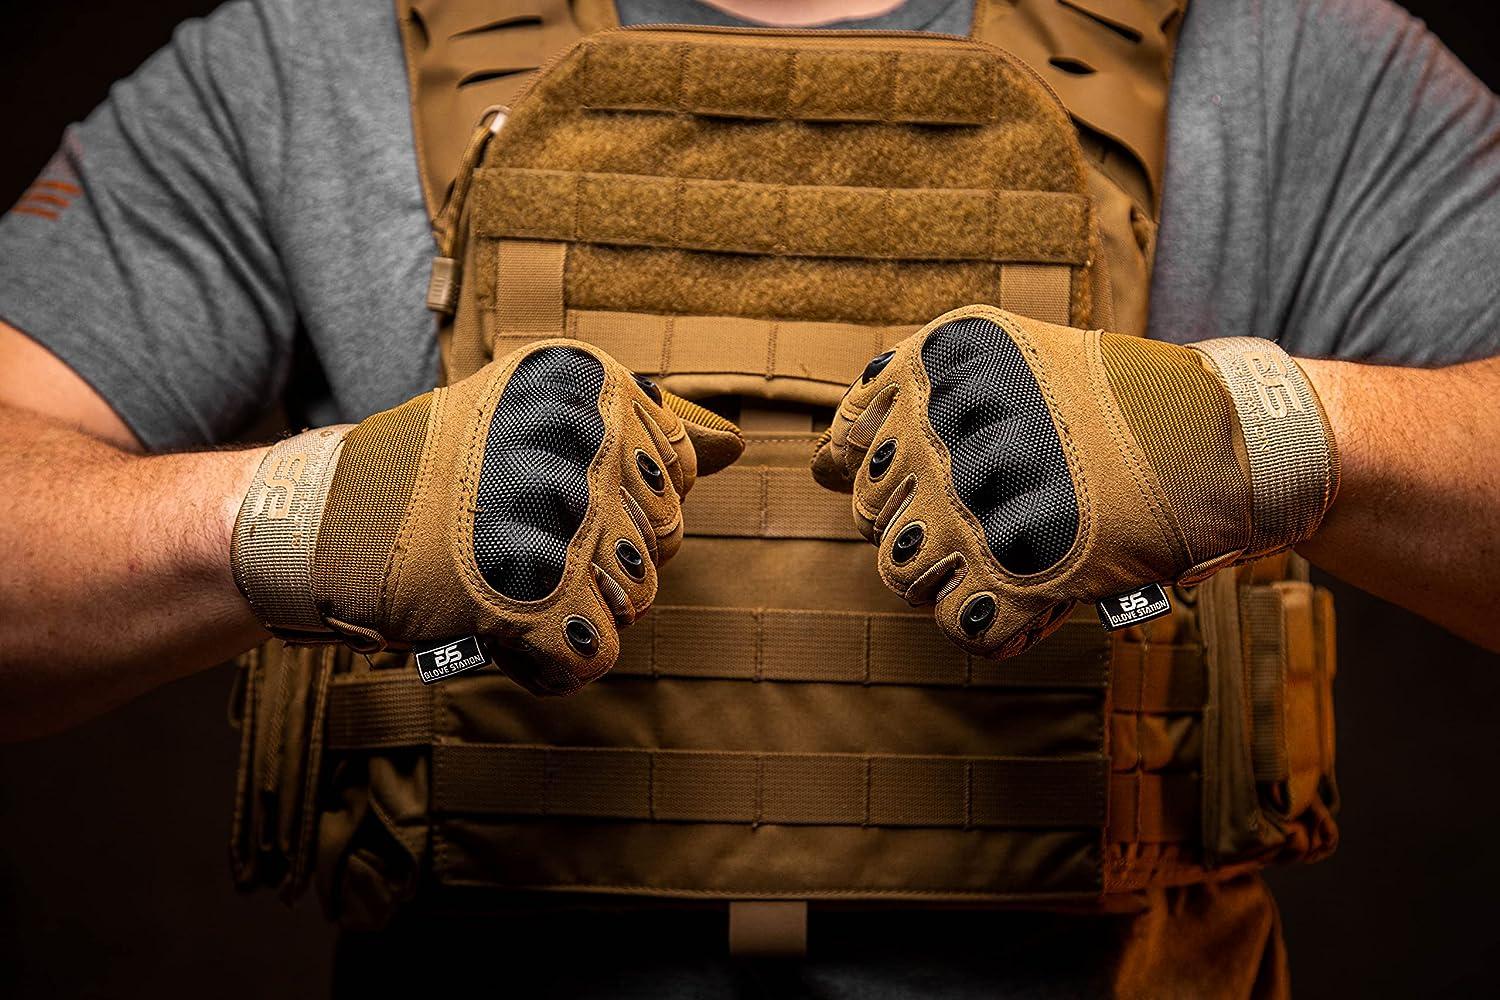 Glove Station- Fingerless Knuckle Tactical Gloves for Men - Motorcycle  Gloves for Tactical Shooting, Airsoft, Hunting, Police Work and Hiking Tan  Medium